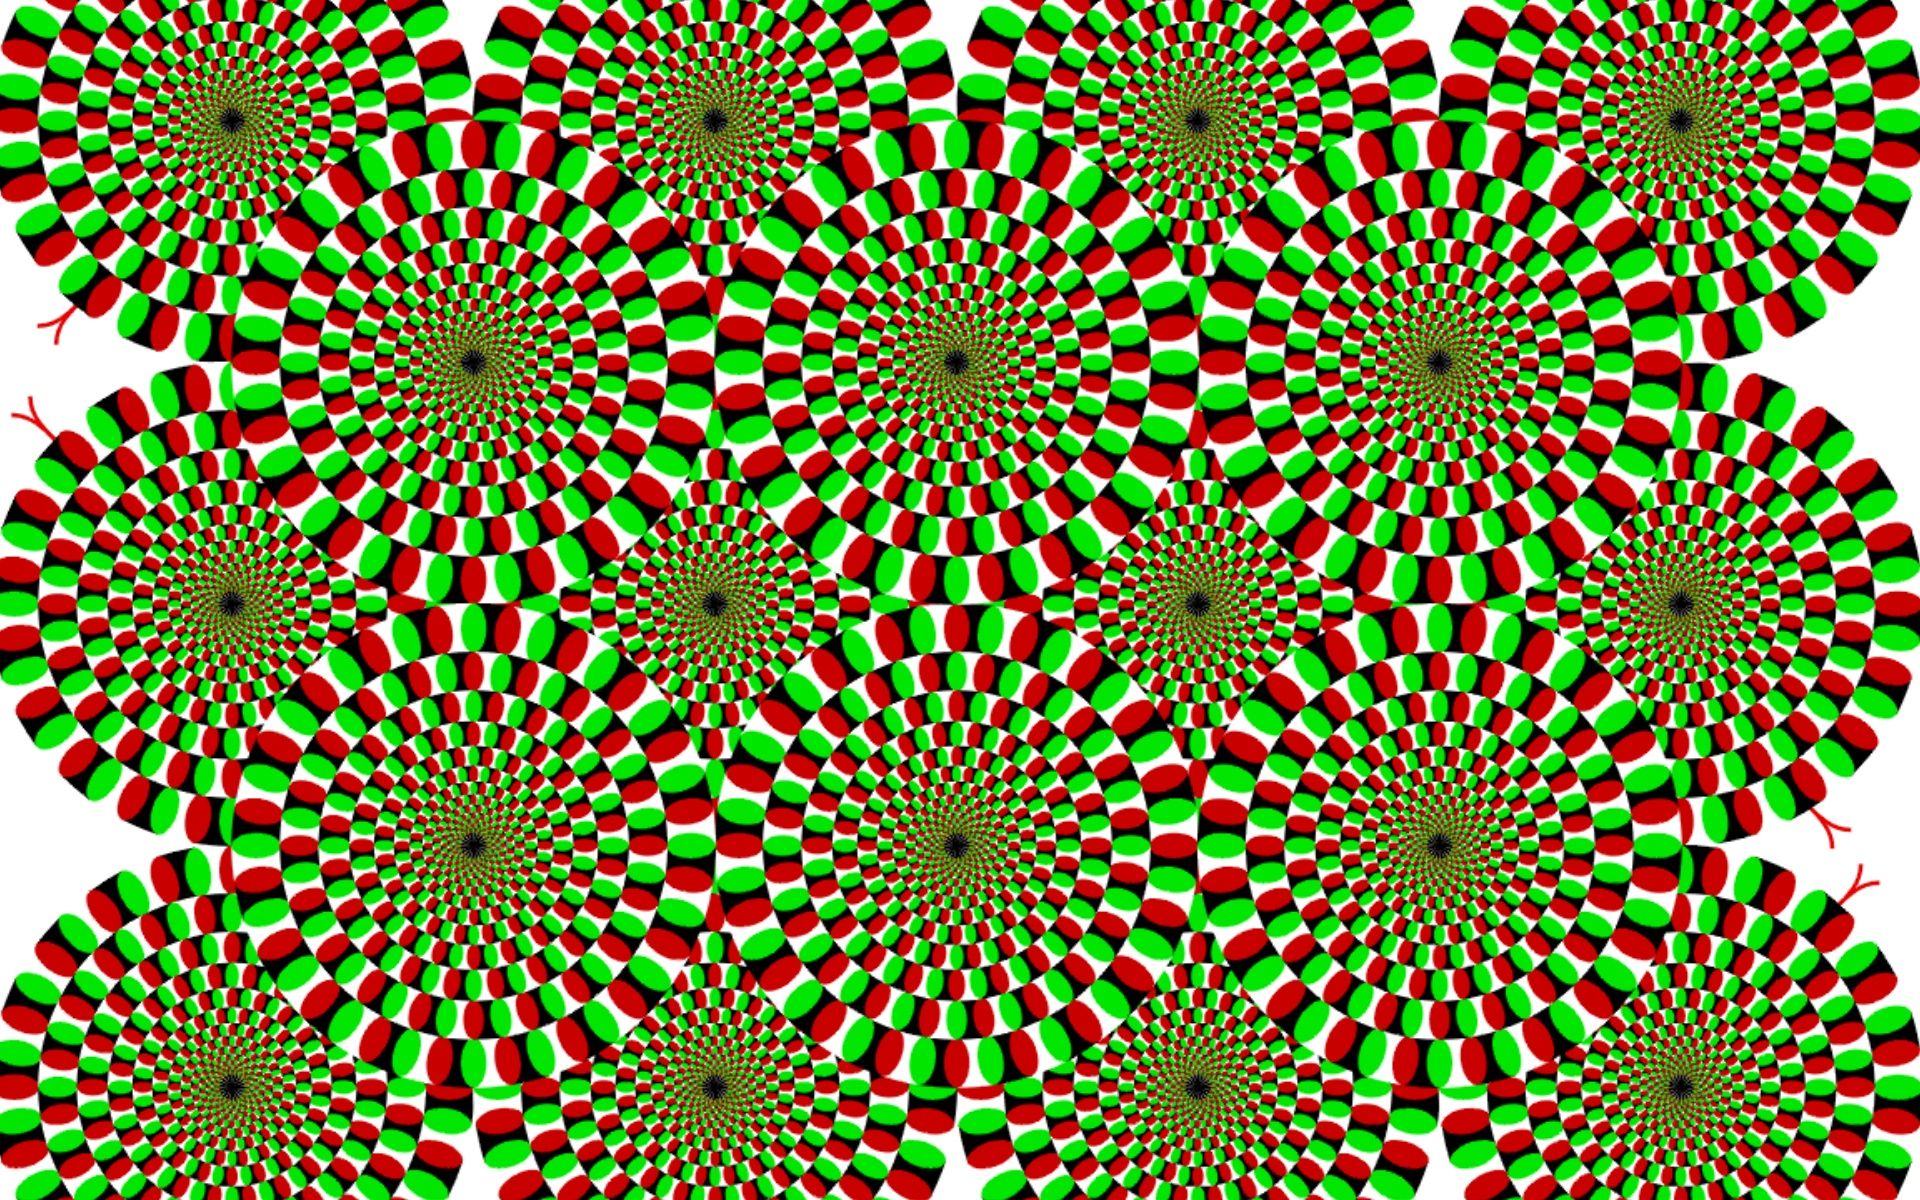 15819_2d_psychedelic_moving.jpg